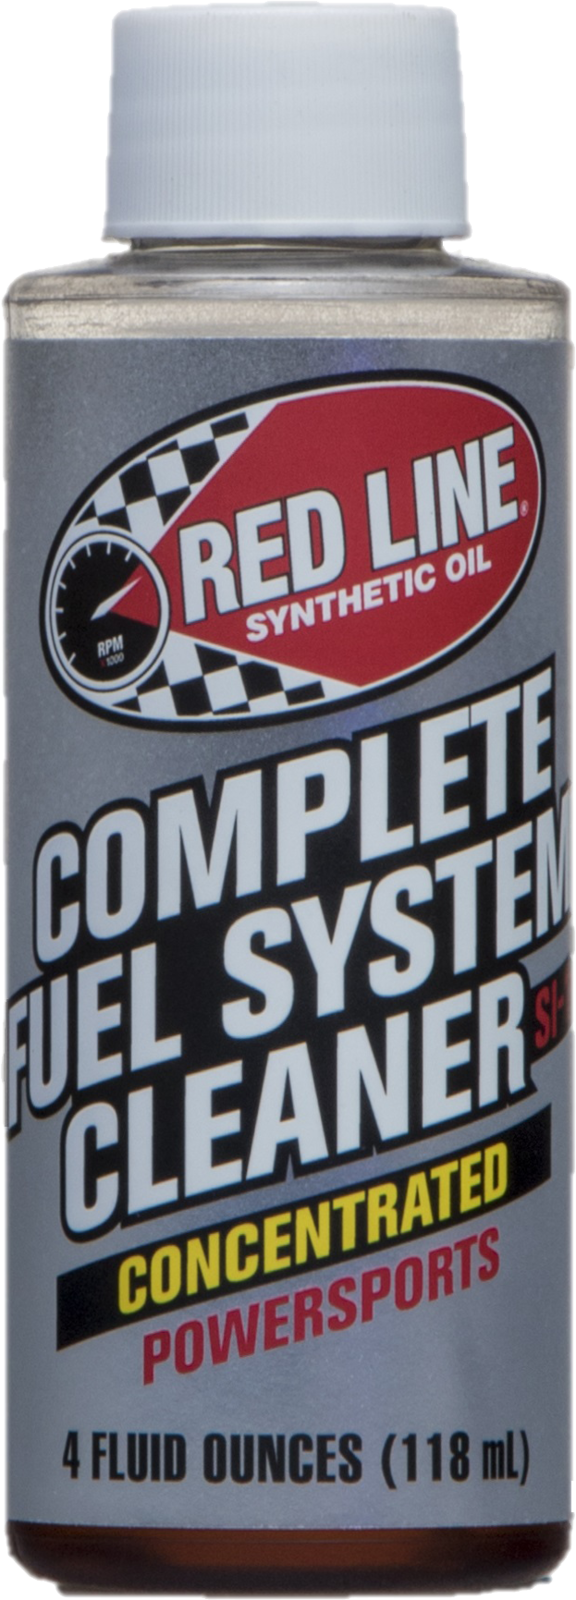 Complete Fuel System Cleaner for Motorcycles